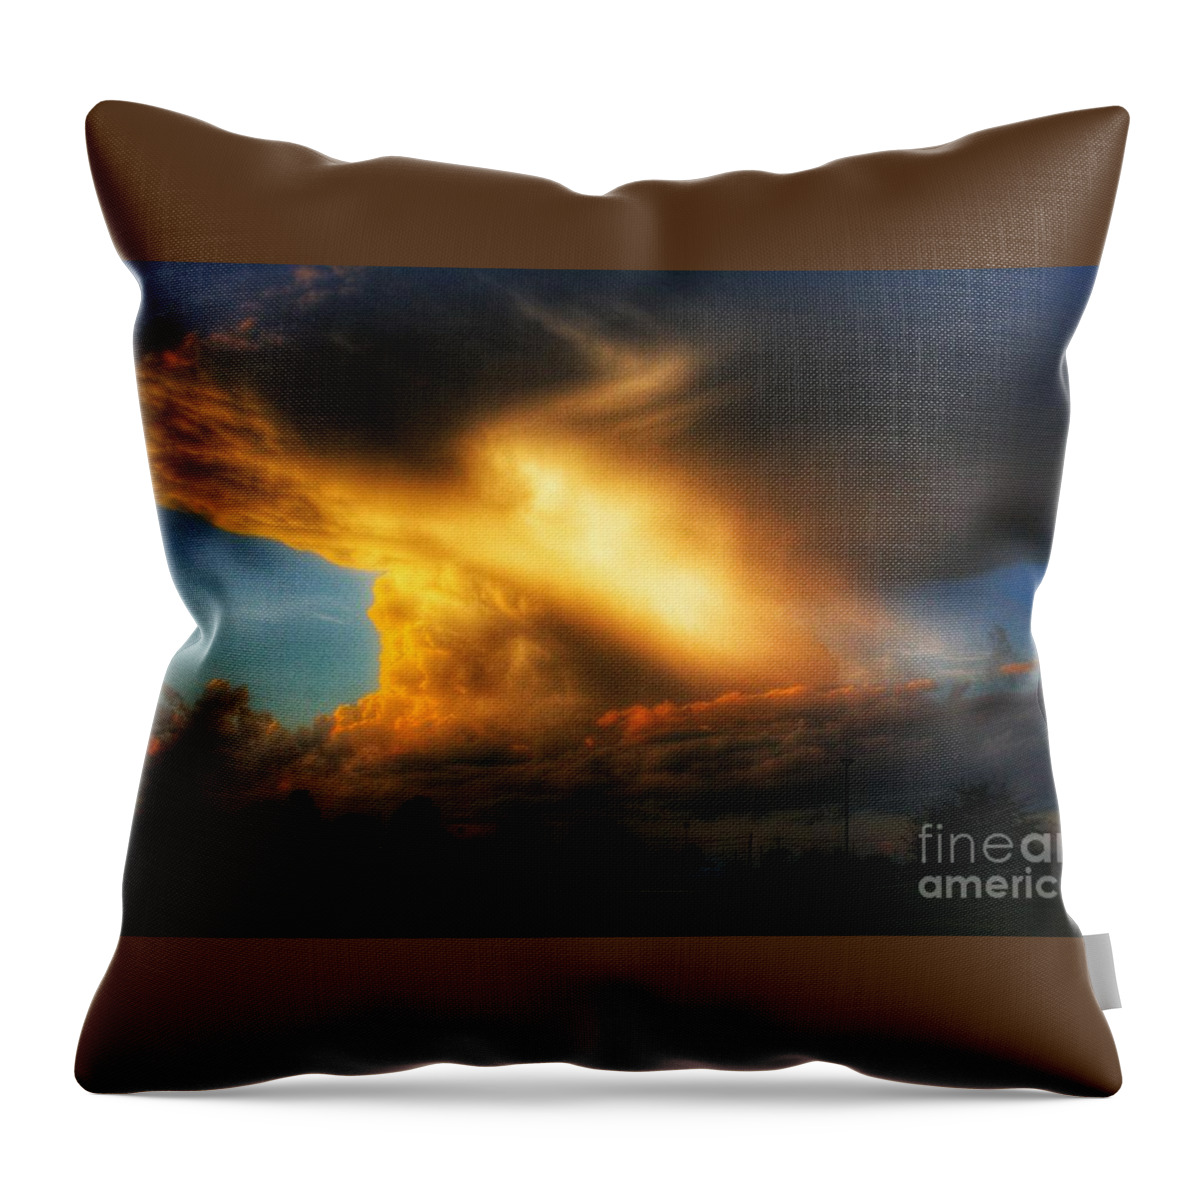  Throw Pillow featuring the photograph Auriferous by Jessica S